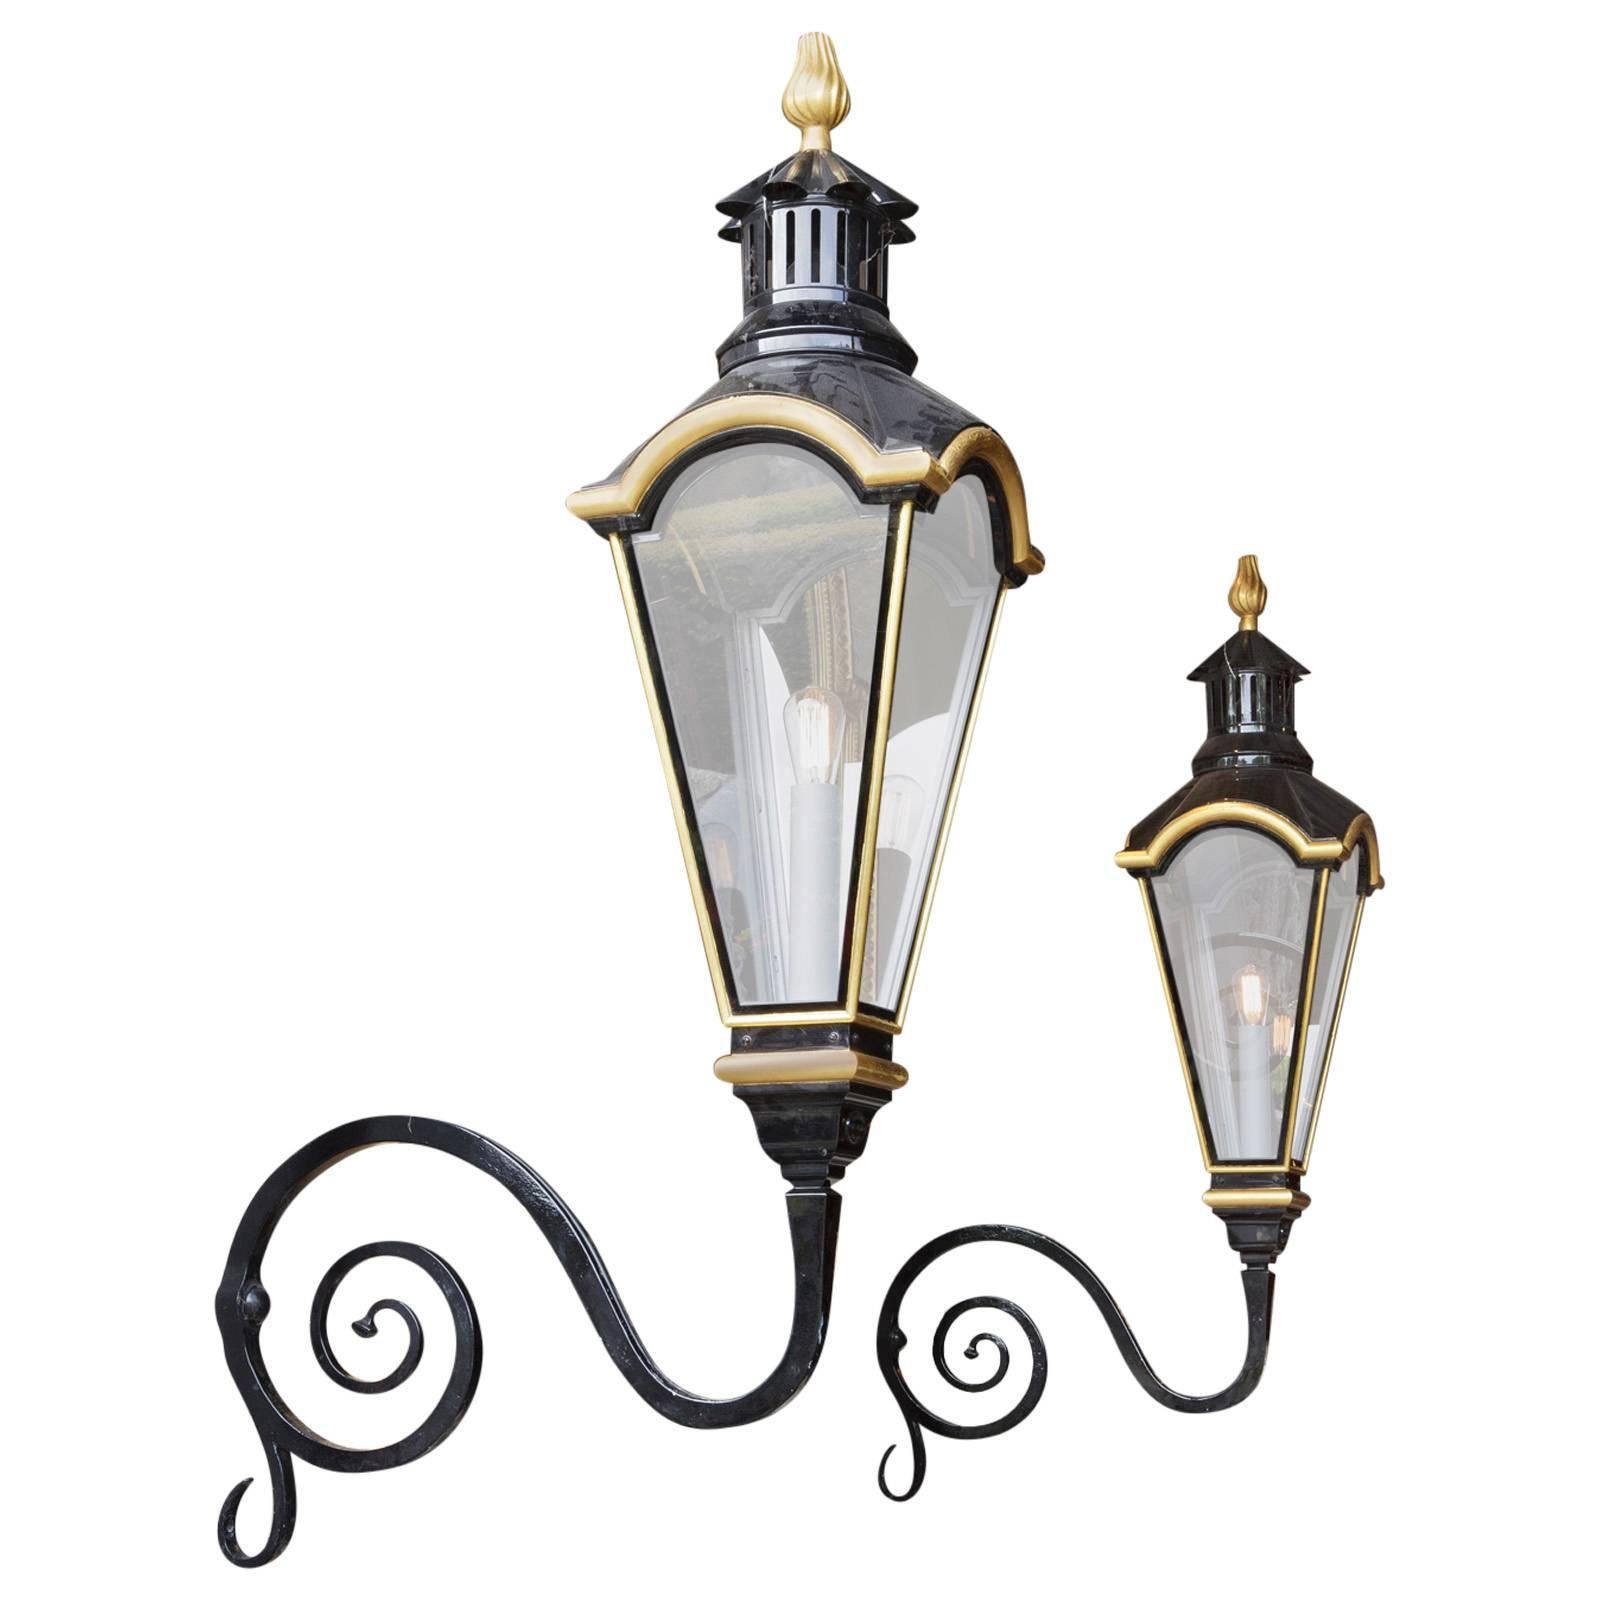 Pair of Dutch Copper Wall Lanterns of Monumental Size with Wrought Iron Arms For Sale